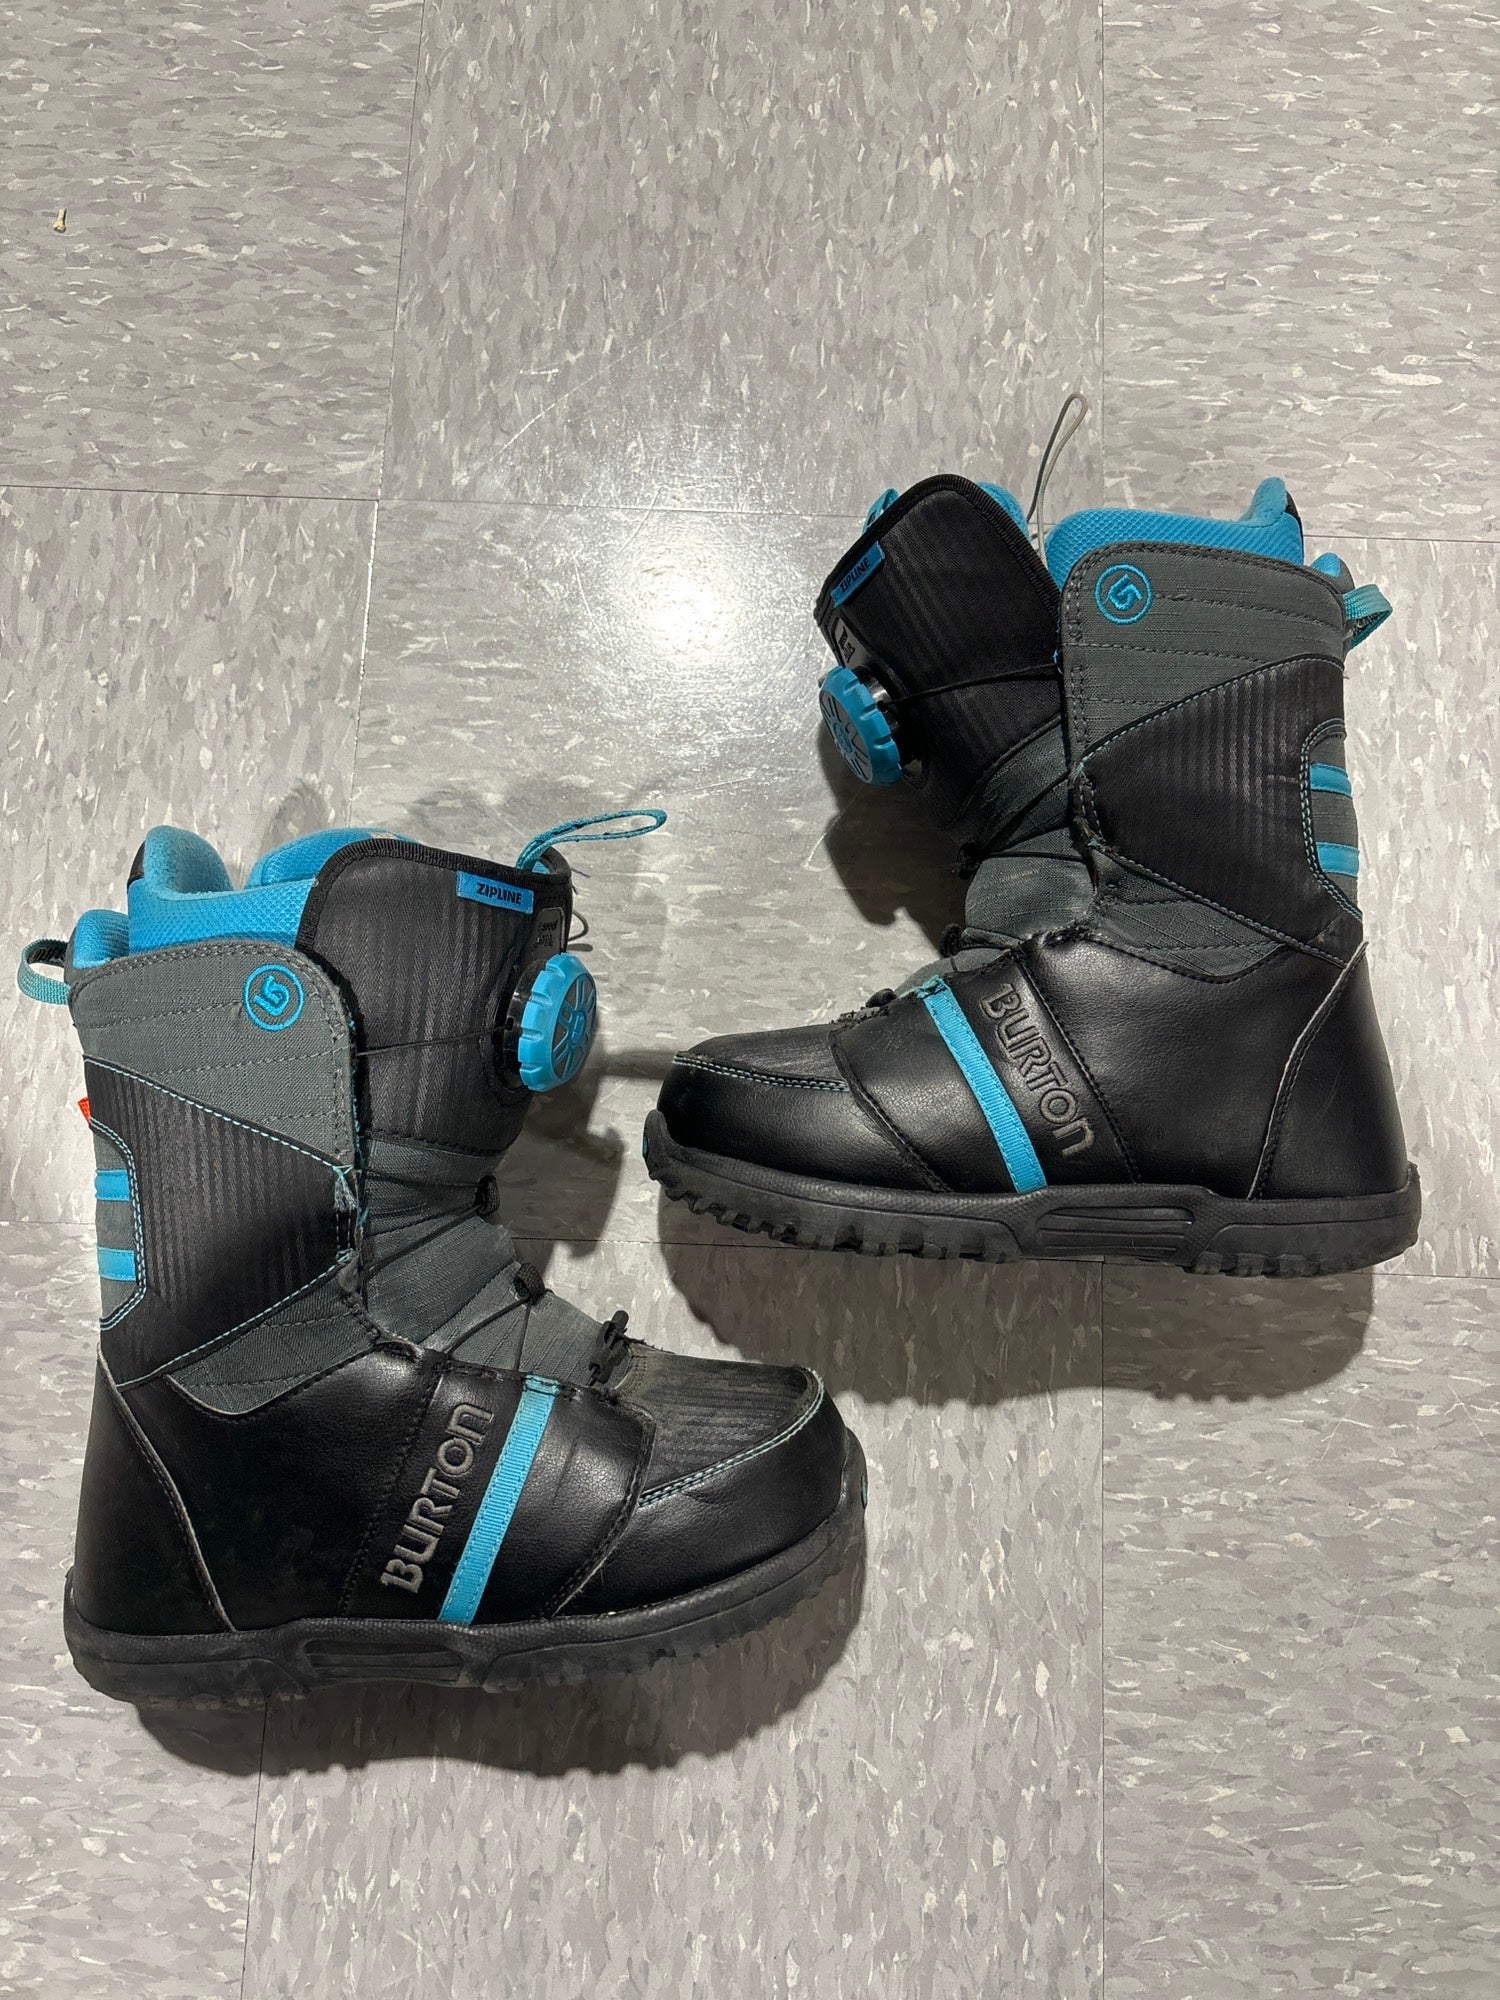 Kid's Snowboard Boots | Used and New on SidelineSwap